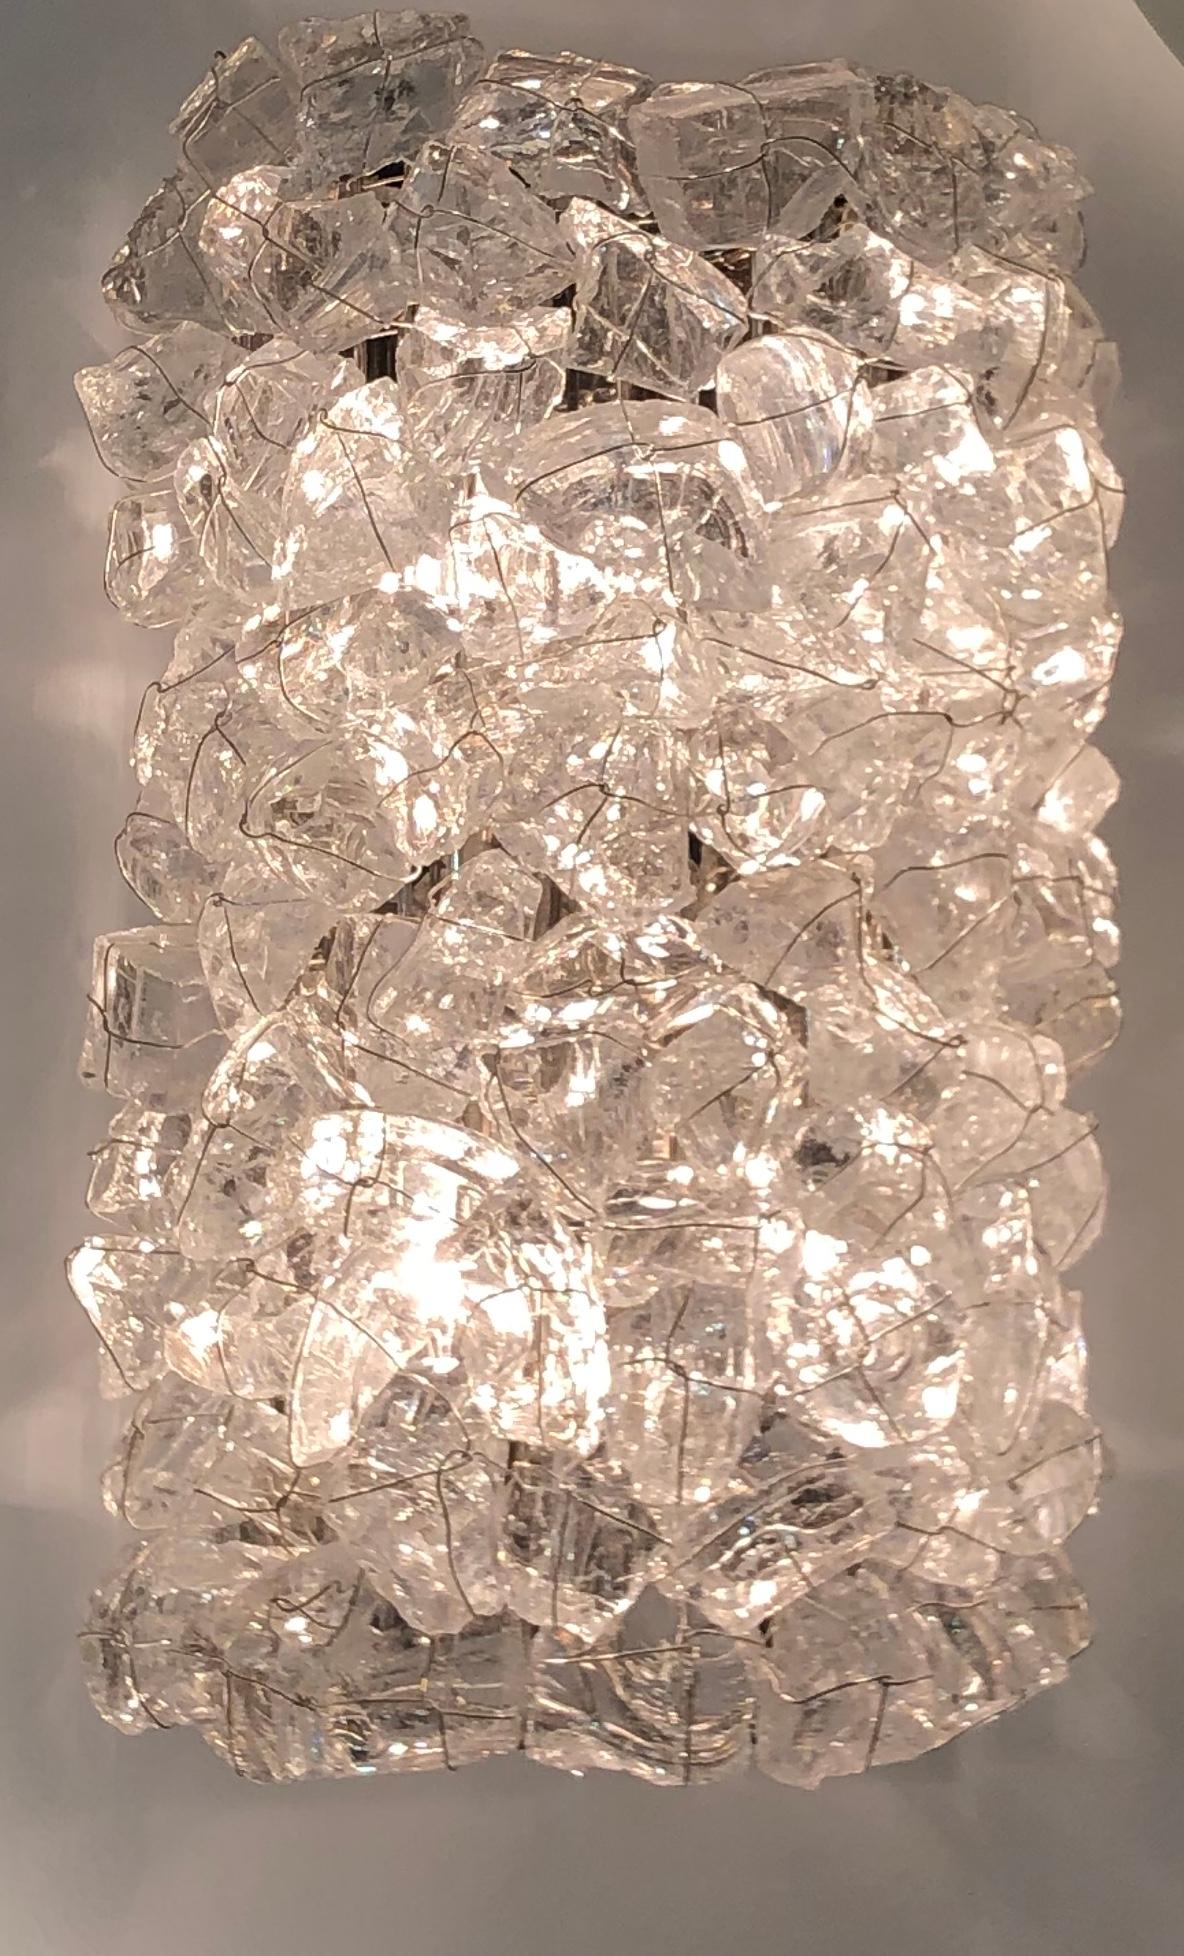 Glass: Recycled glass crystal
Metal Finishes: Nickel-plated brass, nickel-plated jeweler's wire
Weight: 22 lbs (10 kgs)
Note: Due to the natural character of the glass crystals, the dimensions and weight are approximate.
  